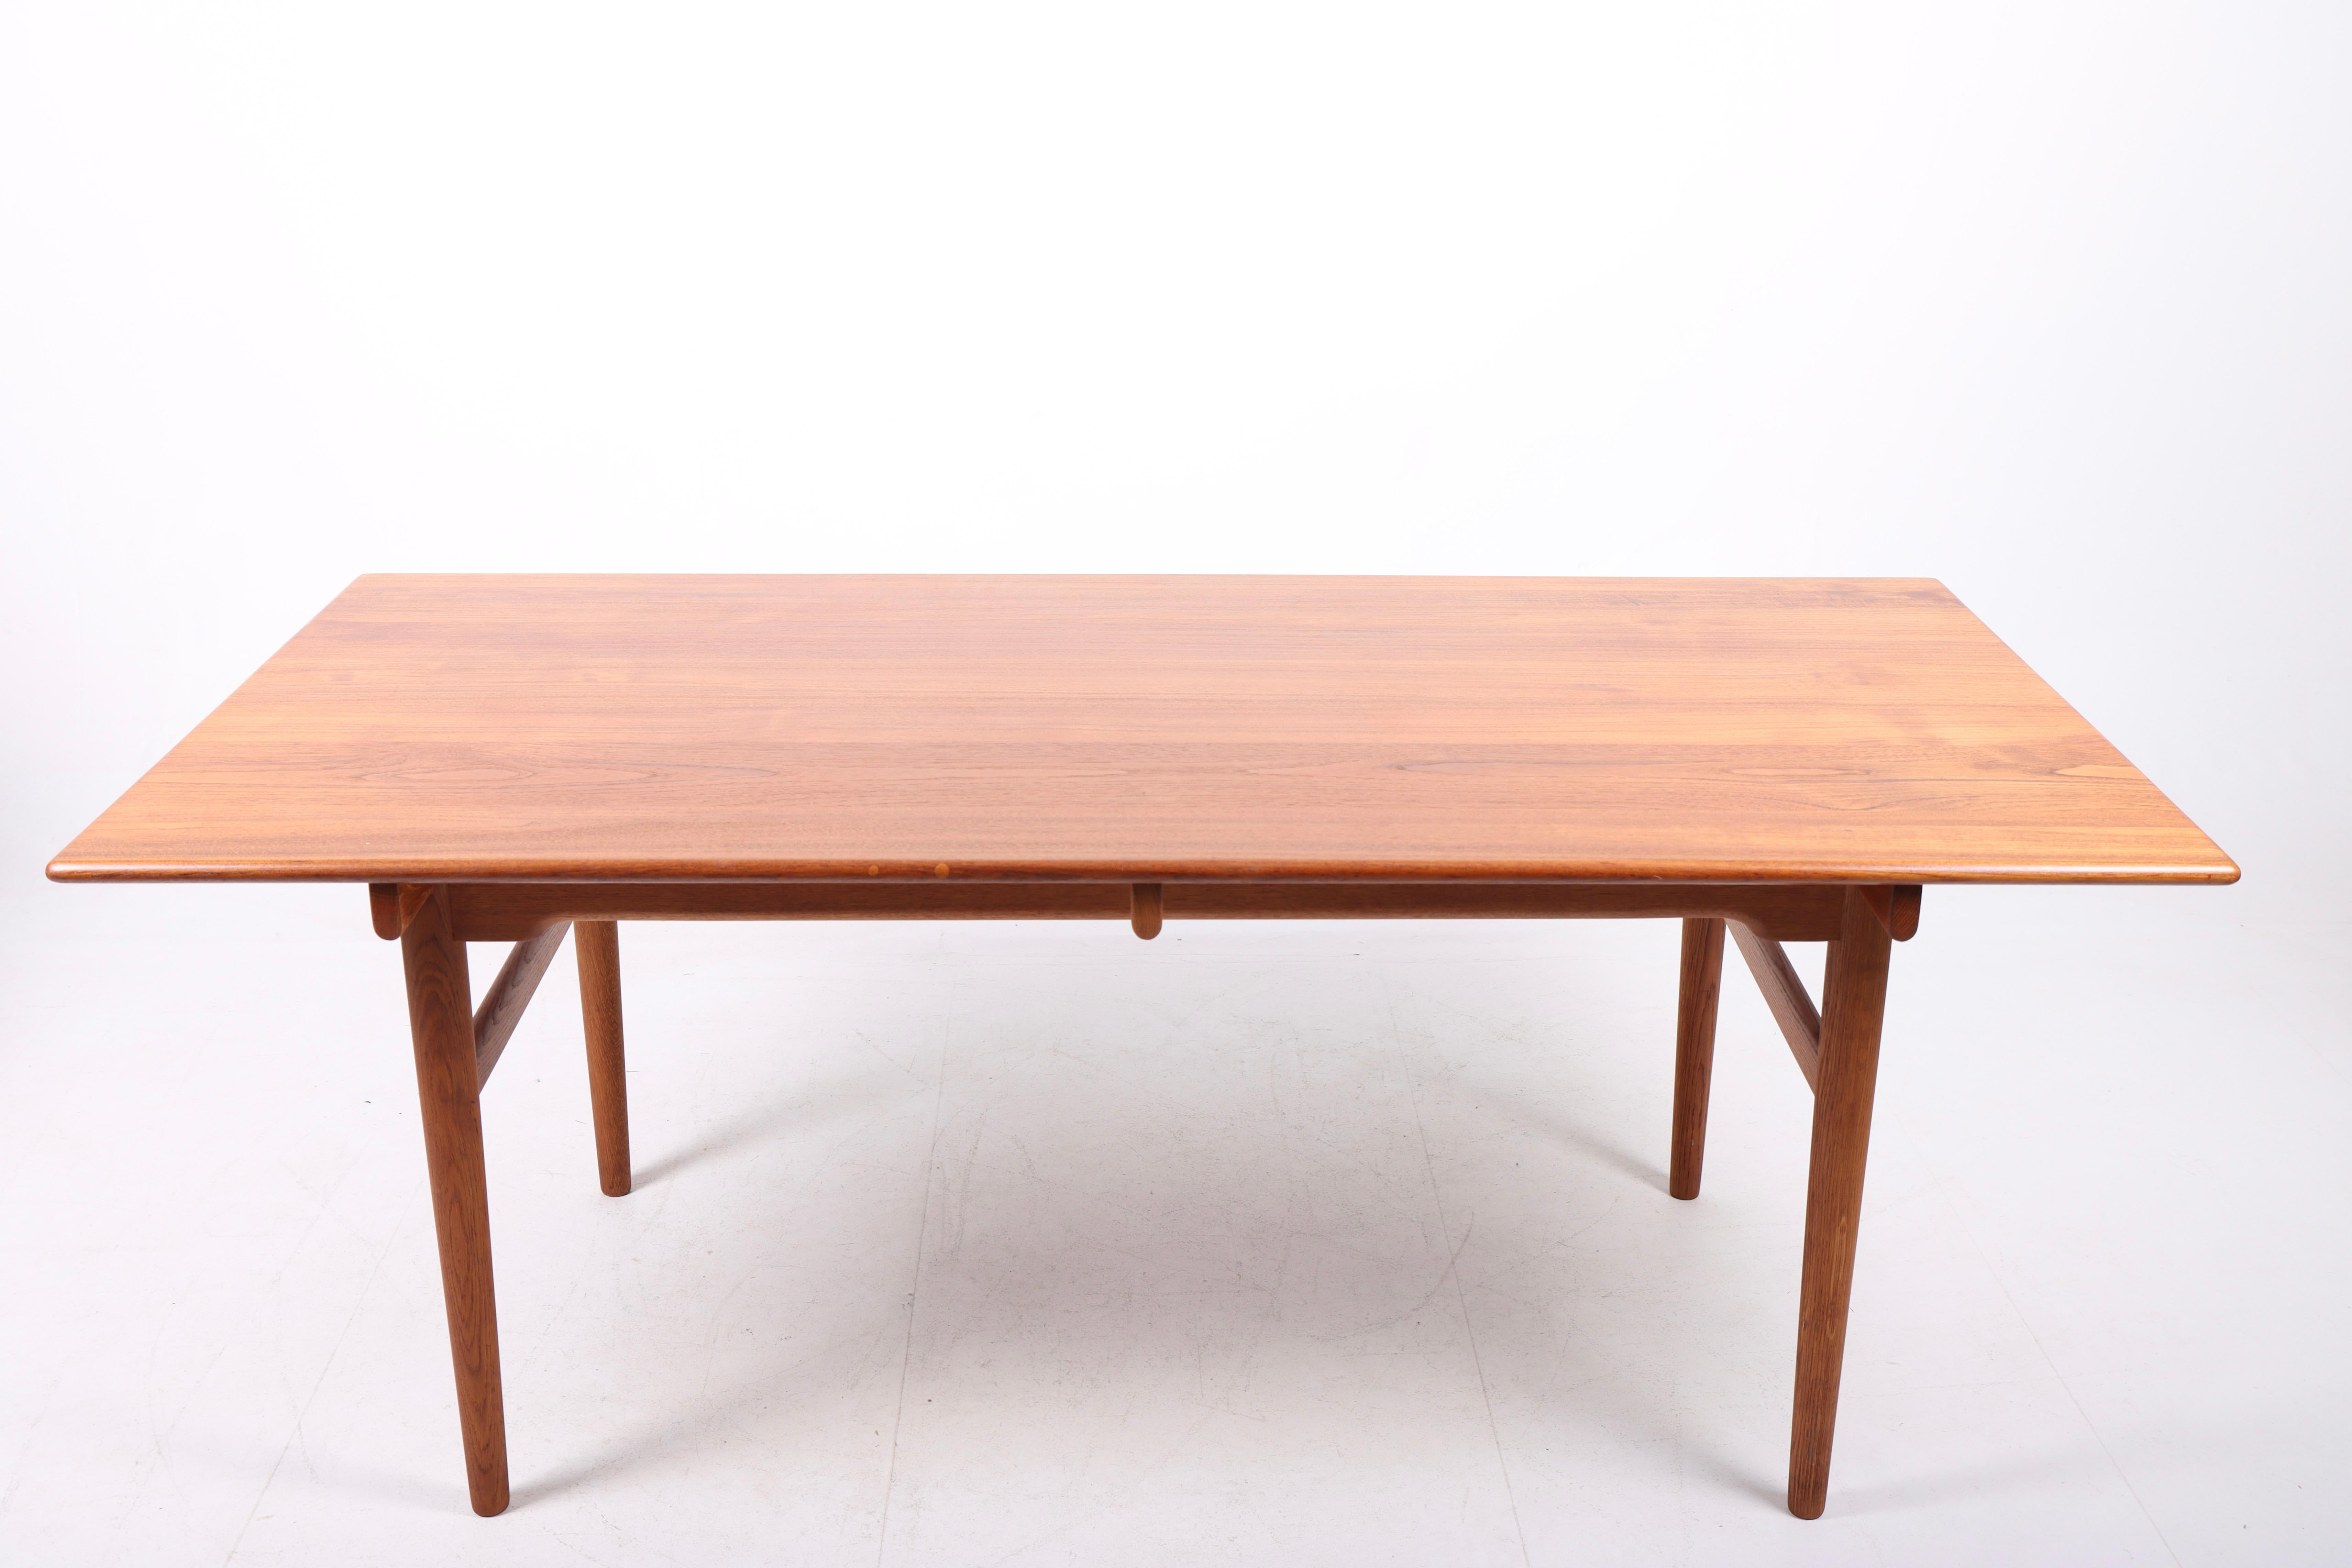 Work table in solid teak designed by Maa. Hans J. Wegner for Andreas Tuck cabinetmakers, Denmark. Great original condition.